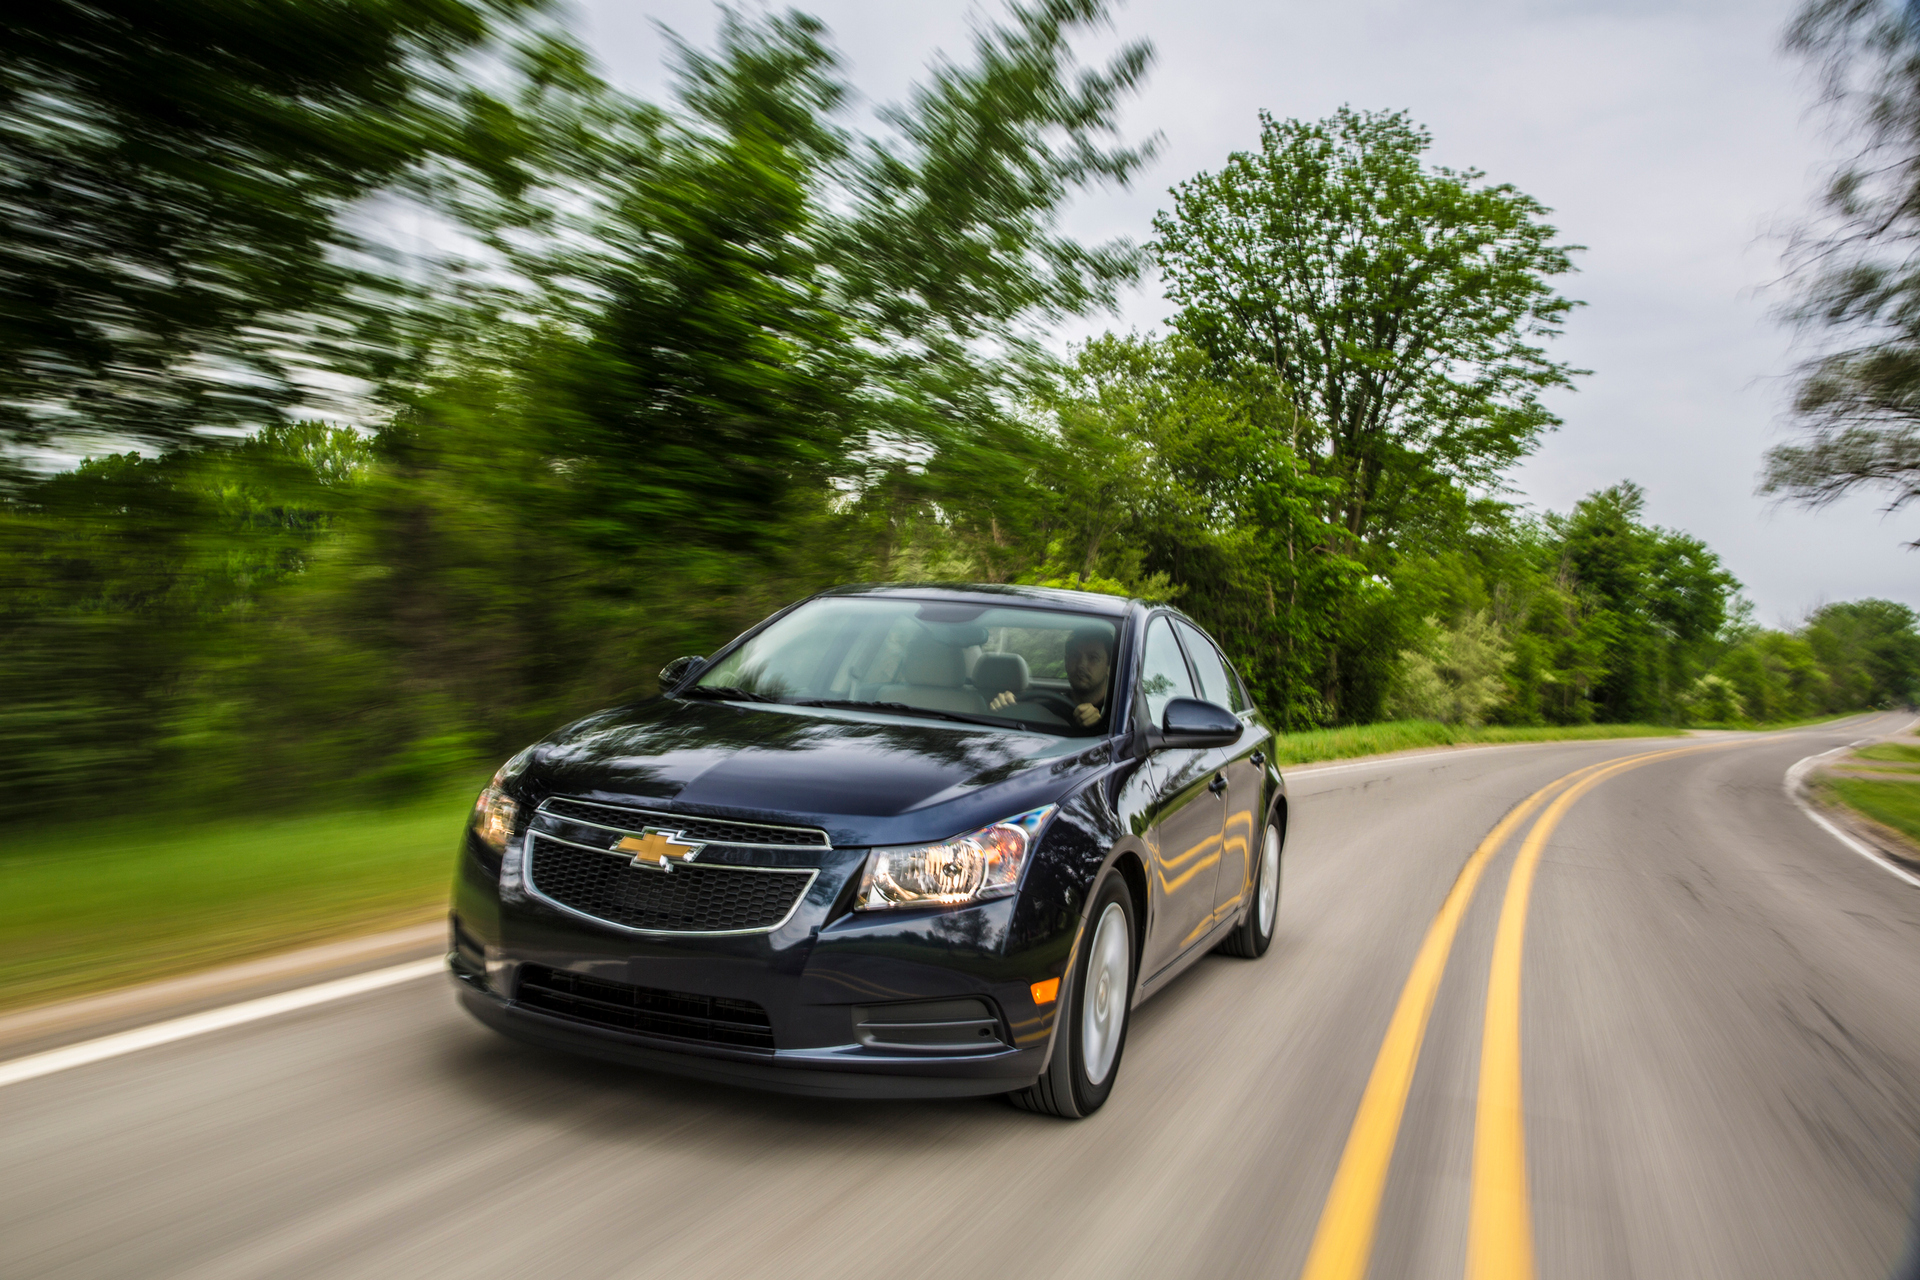 Who Makes the Chevy Cruze Diesel Engine?